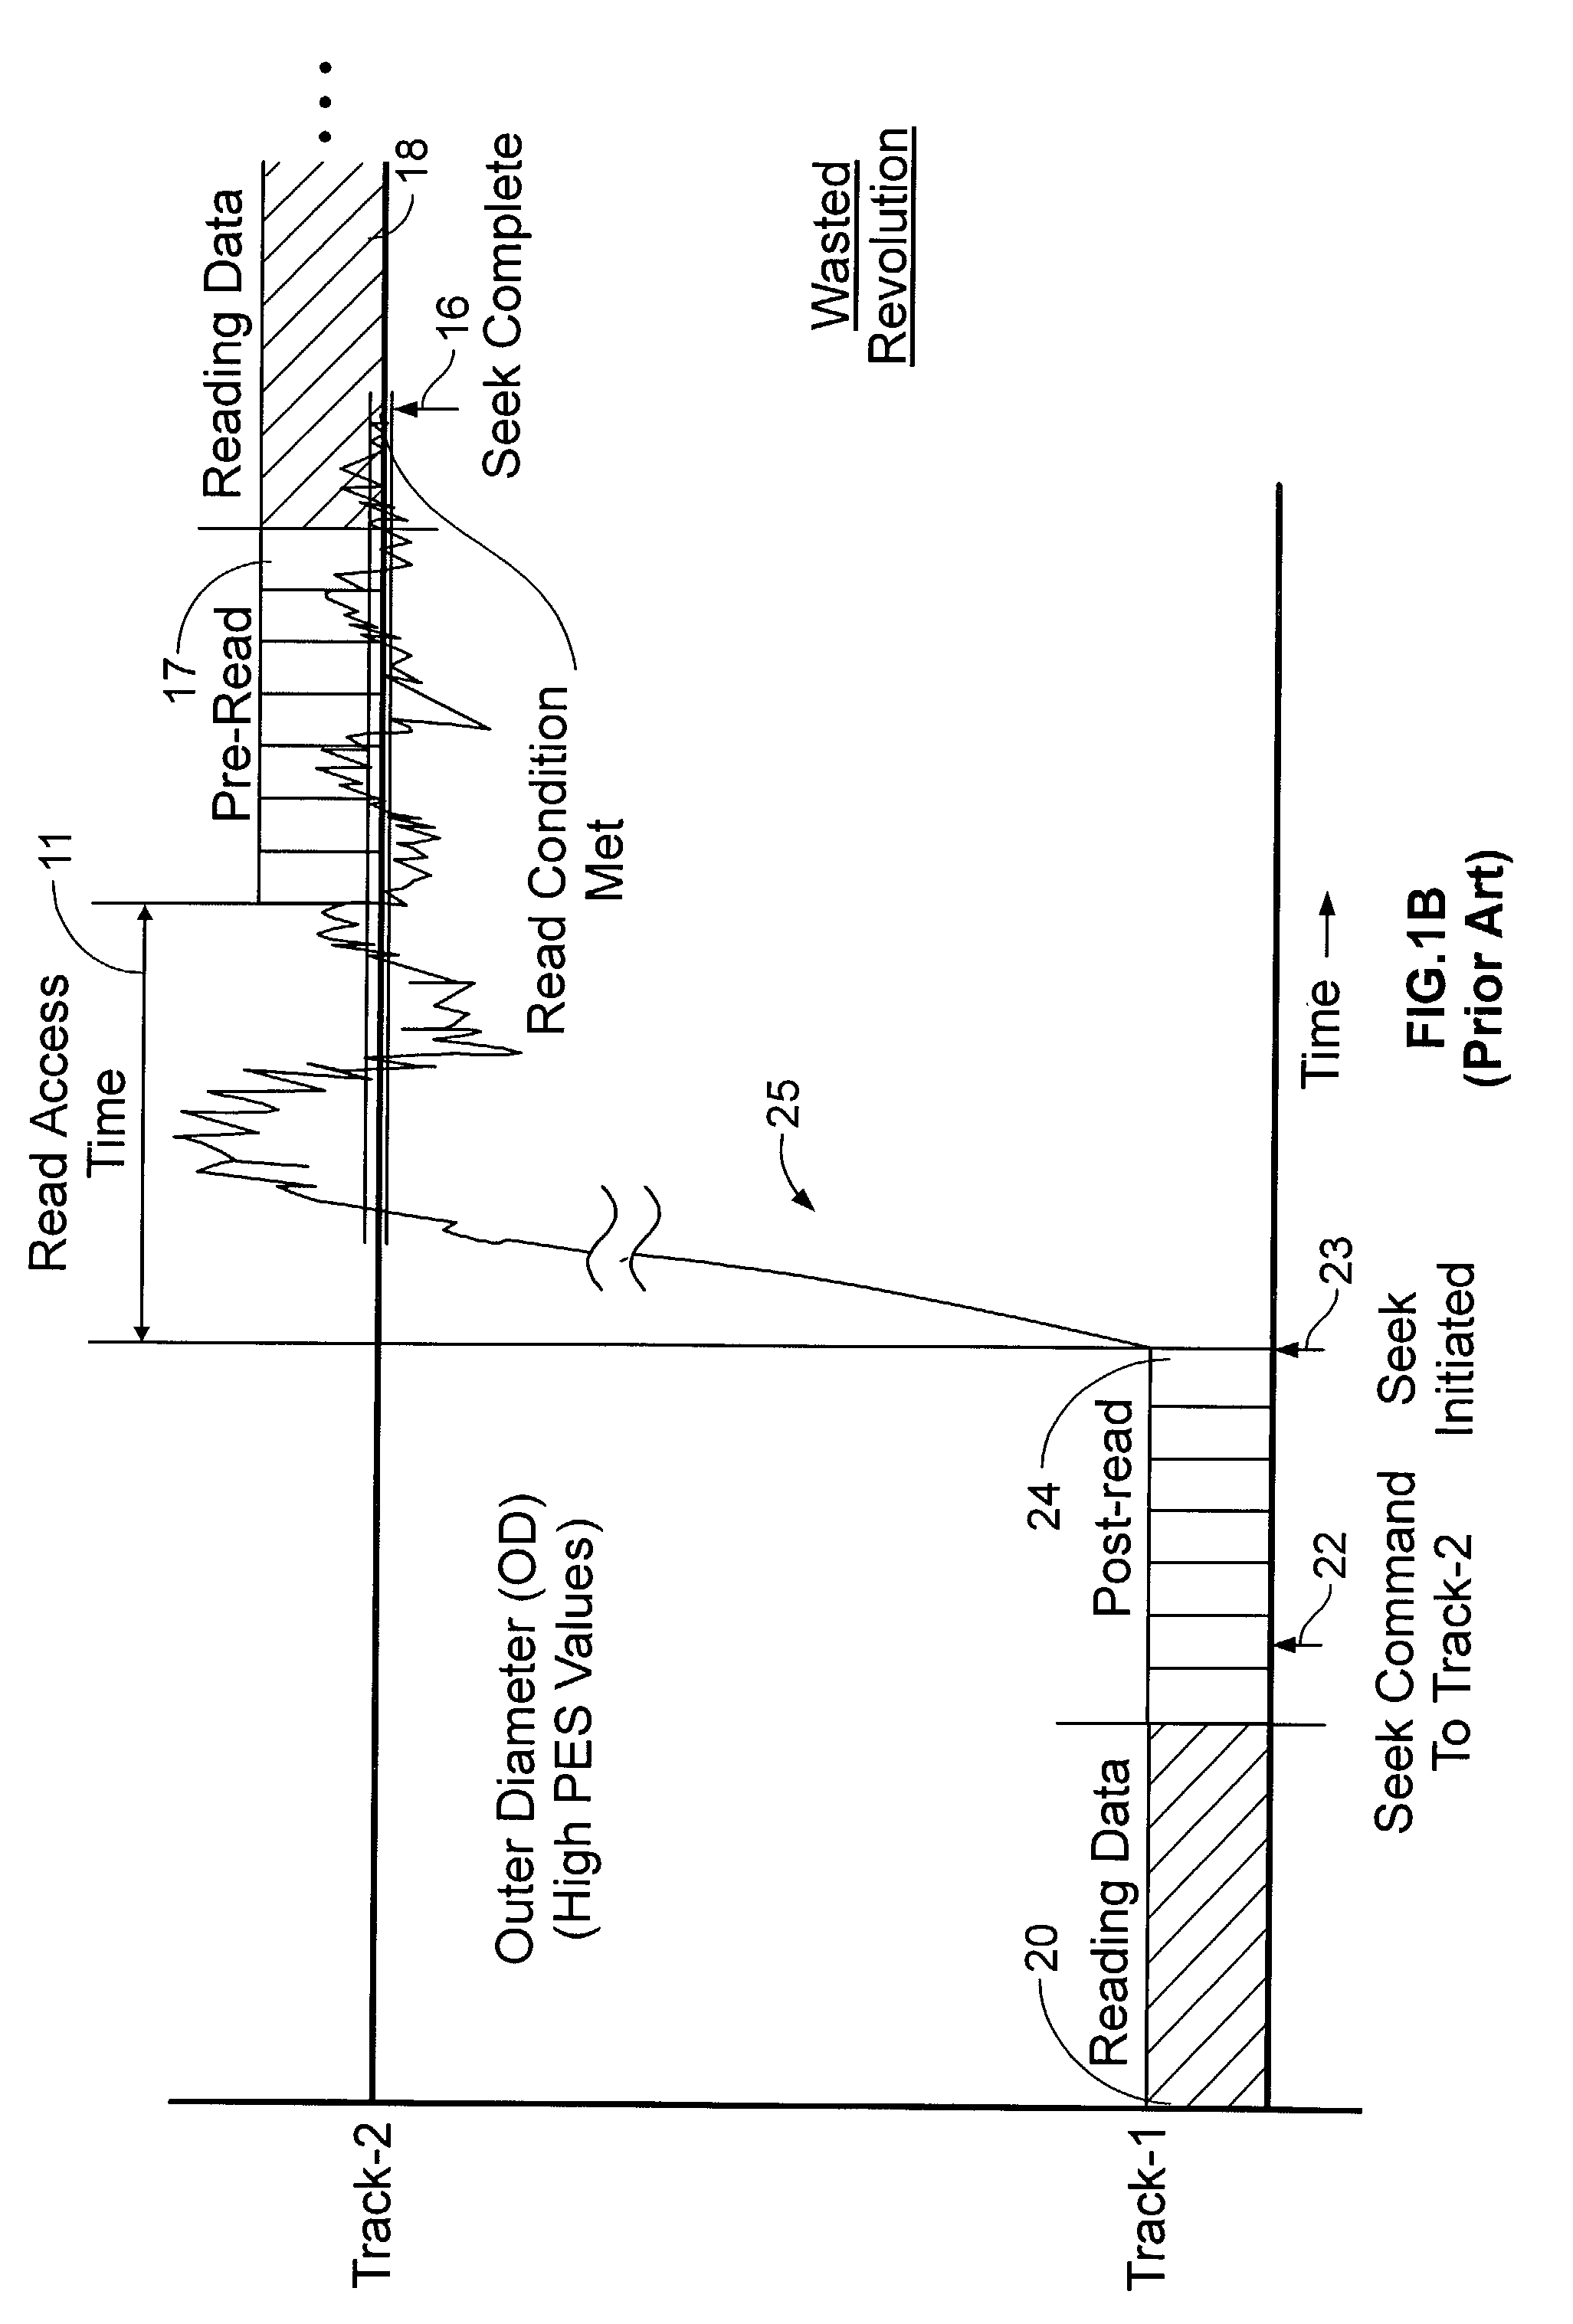 Adaptively estimating a read access time to a second track based upon the binned radial position of the second track within a rotating media storage device